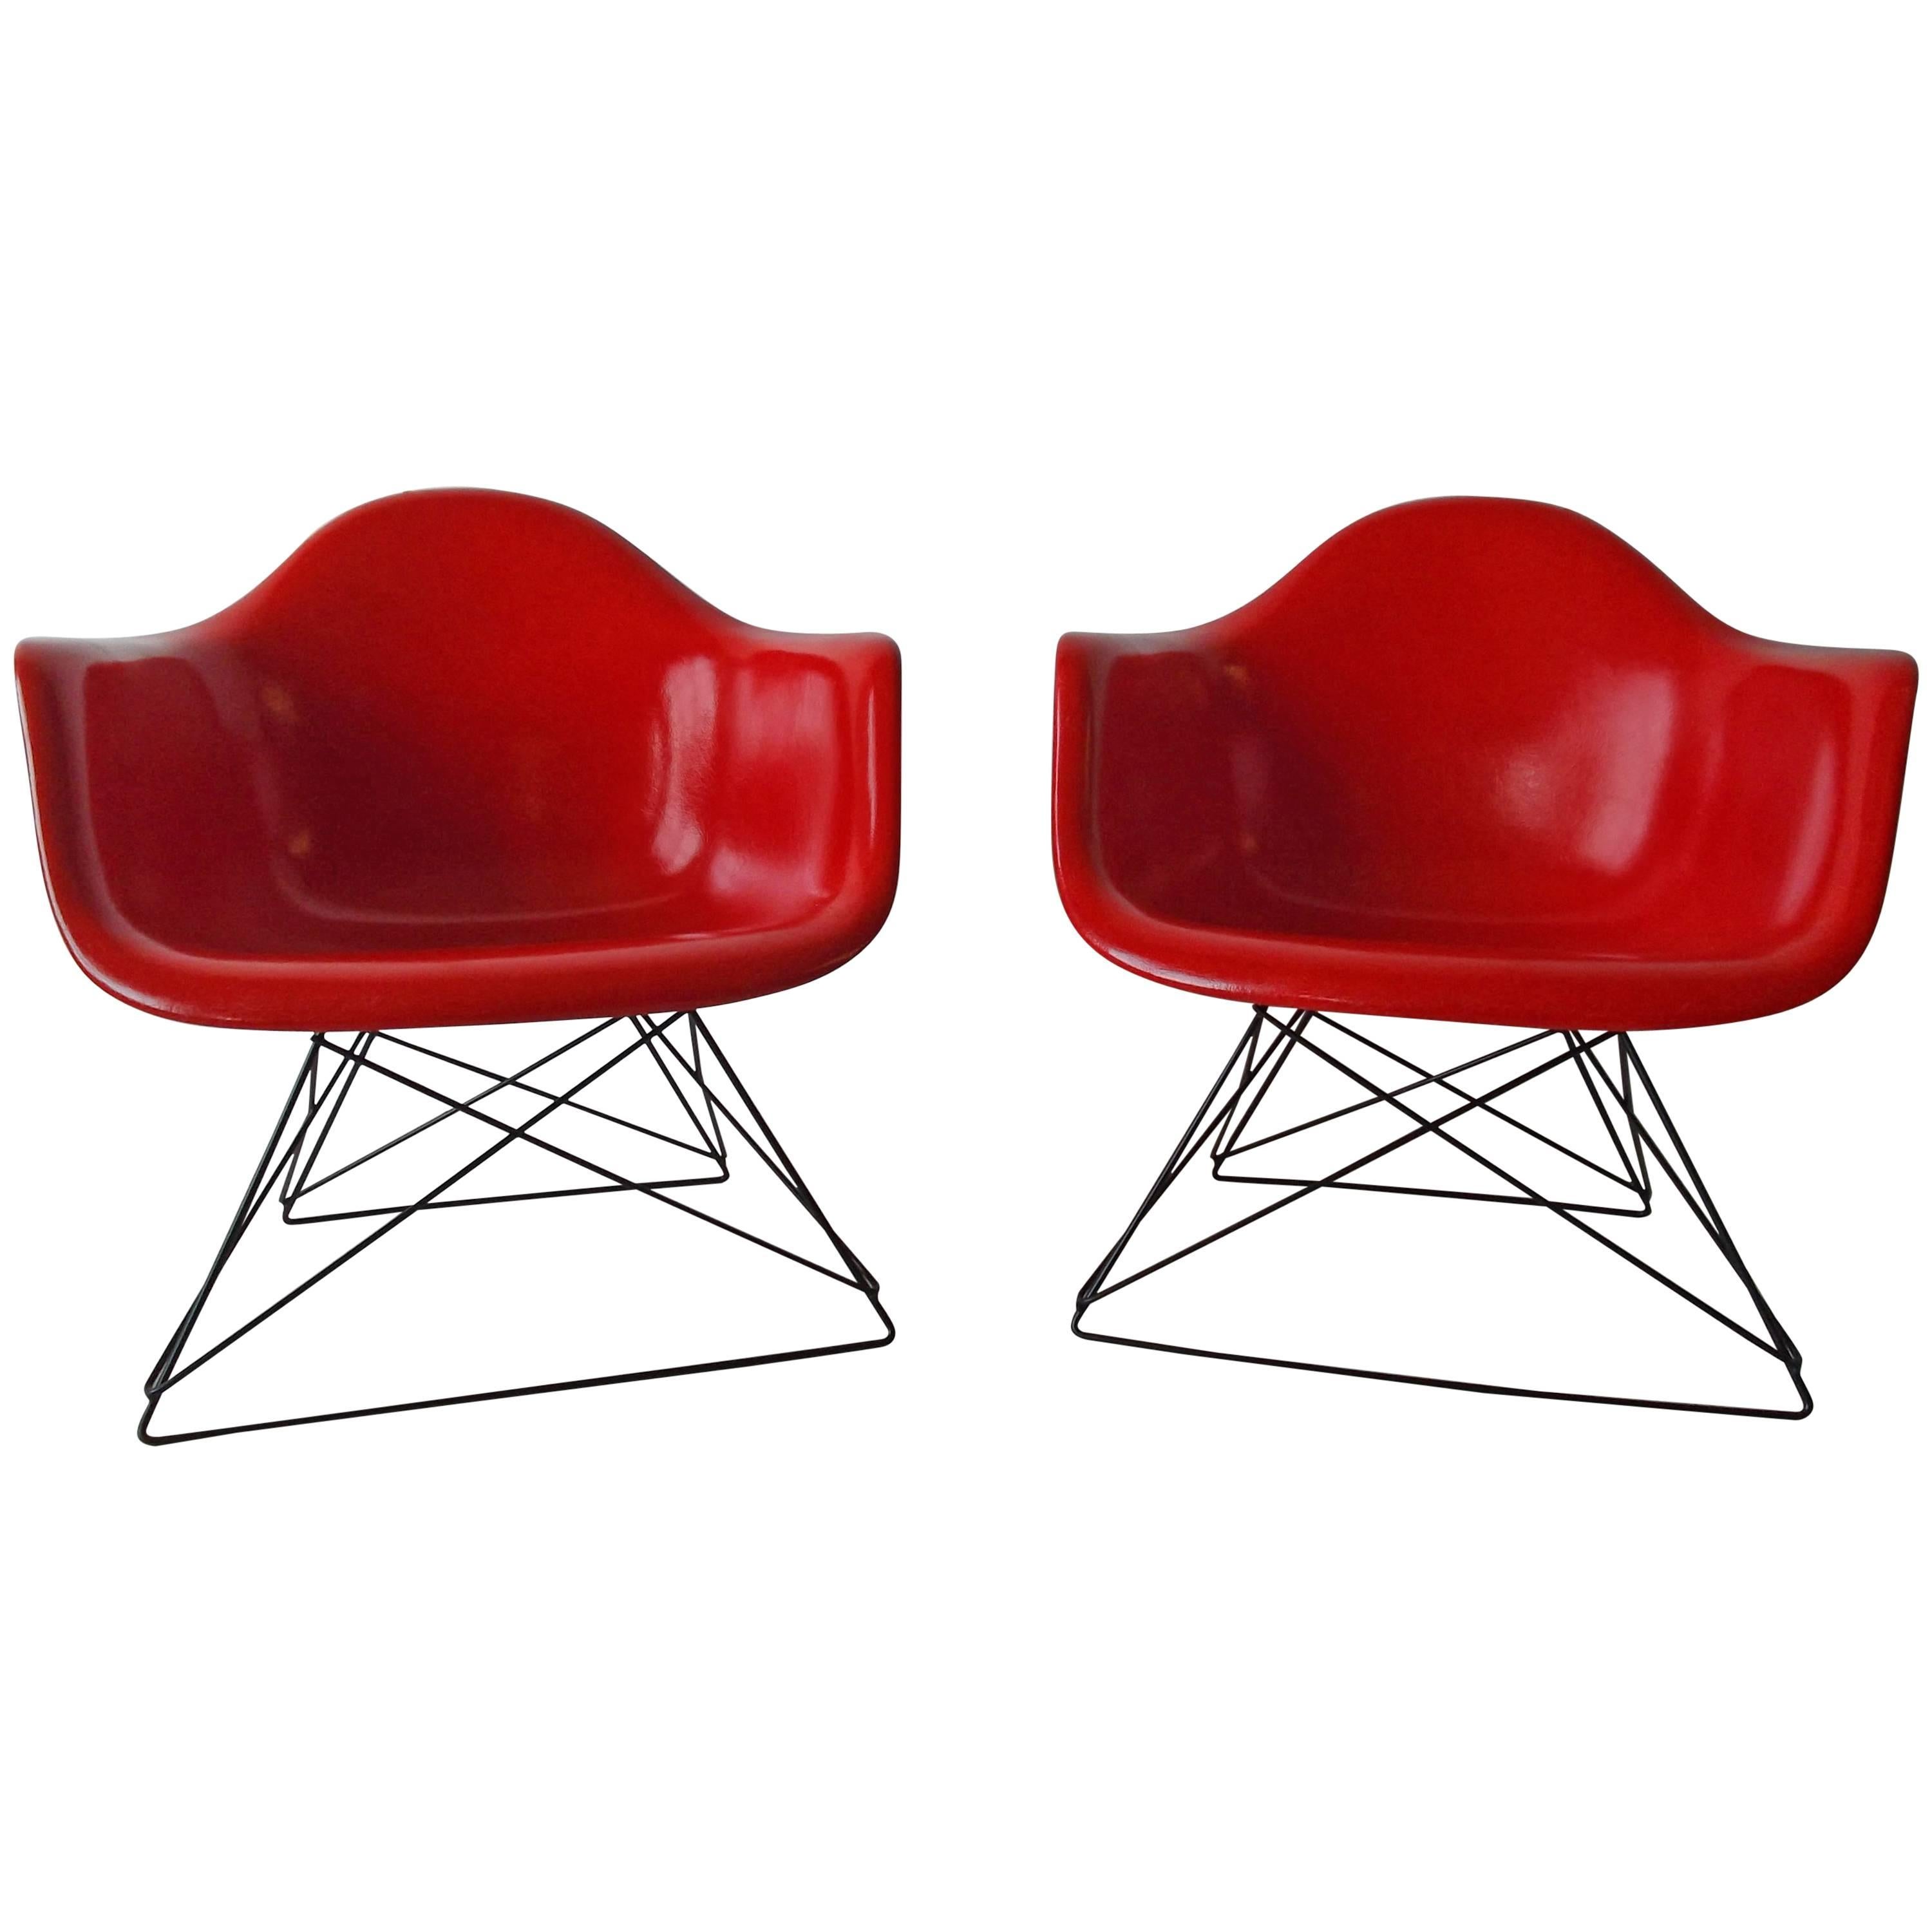 Charles Eames Herman Miller True Red Fiberglass Chairs For Sale